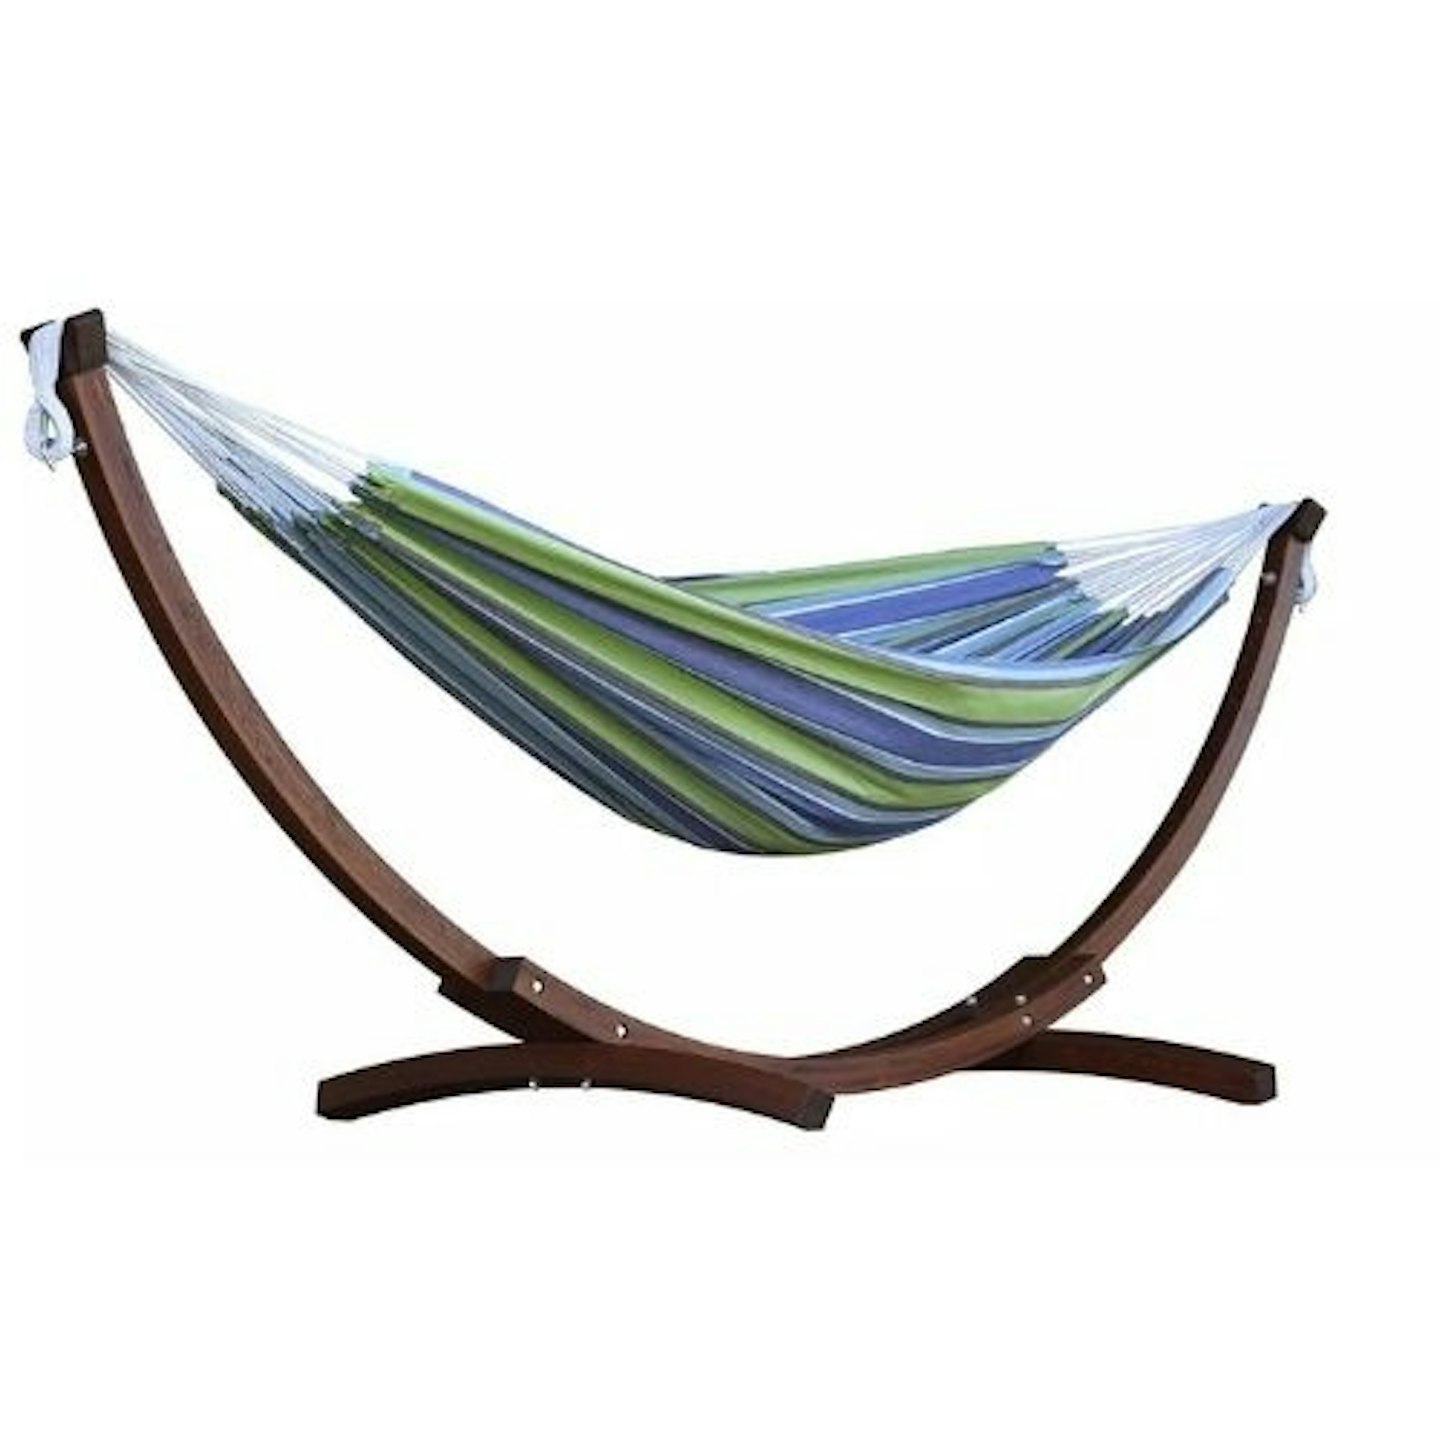 Vivere Double Cotton Hammock With Wooden Stand